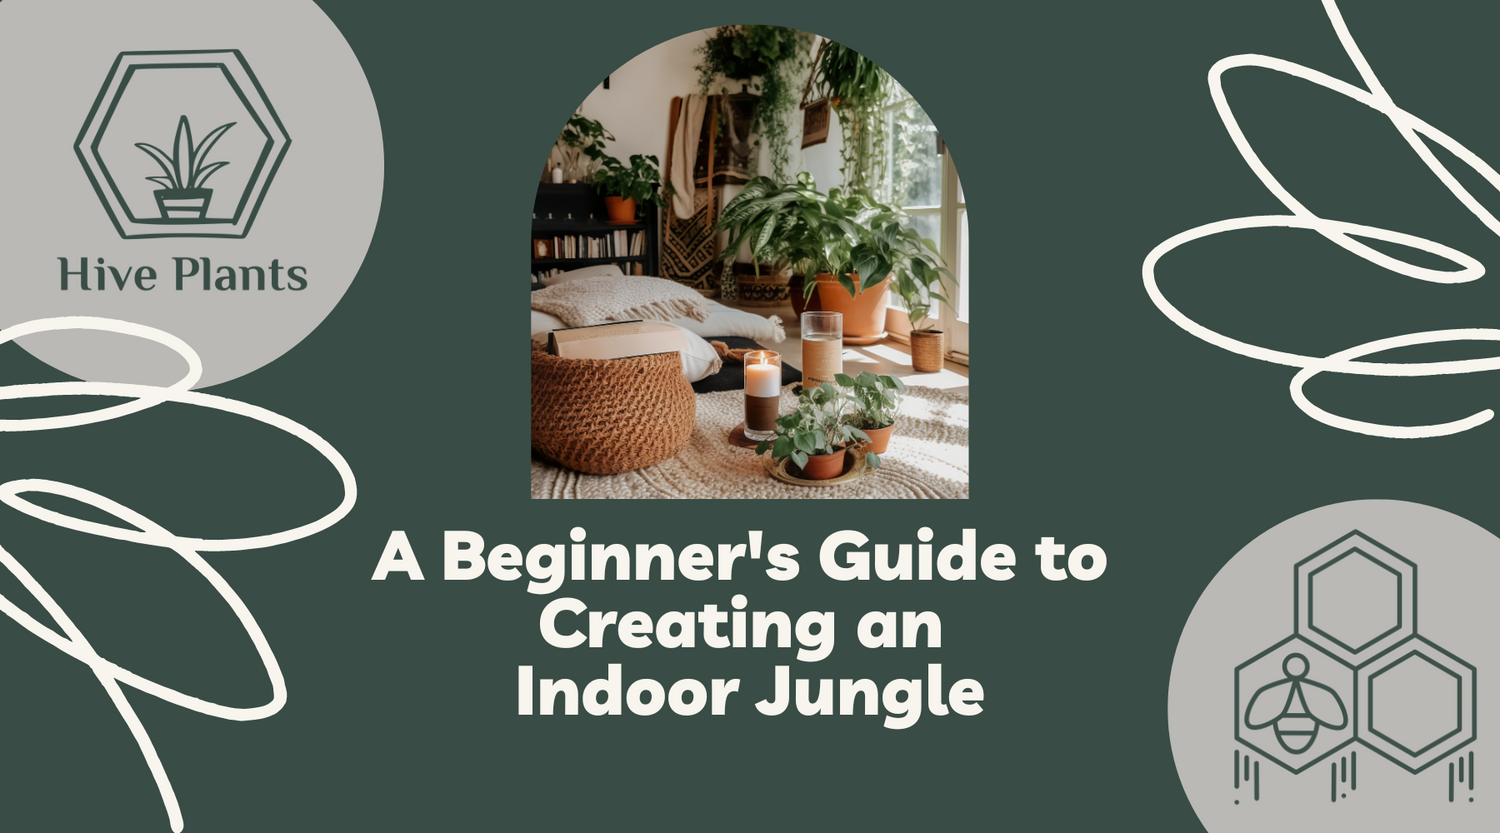 Bringing Nature Indoors: A Beginner's Guide to Creating an Indoor Jungle